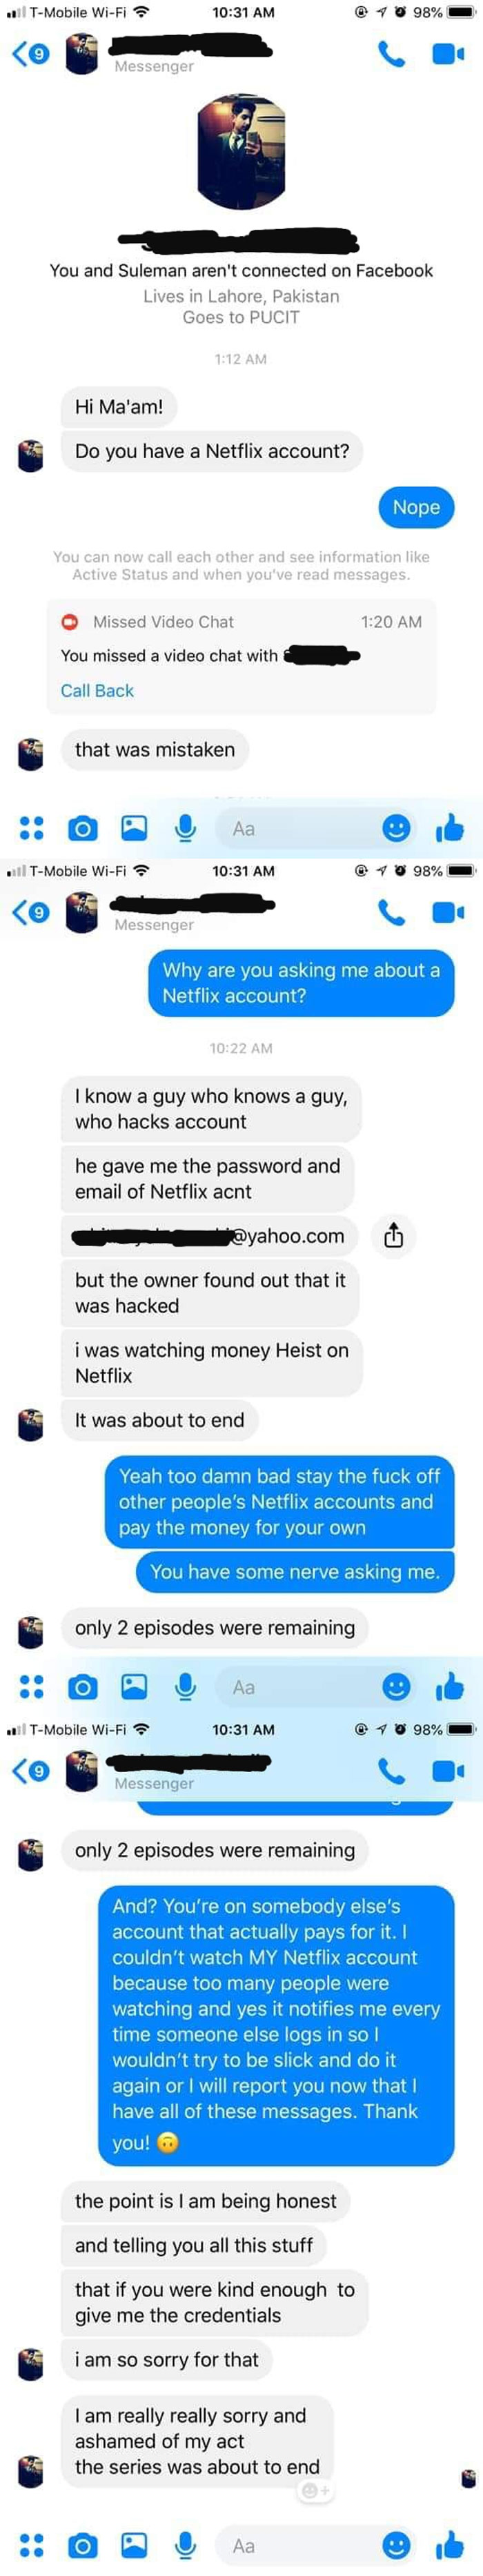 Password Changed On Netflix Hacker; Hacker Messages Account Owner To Change It Back